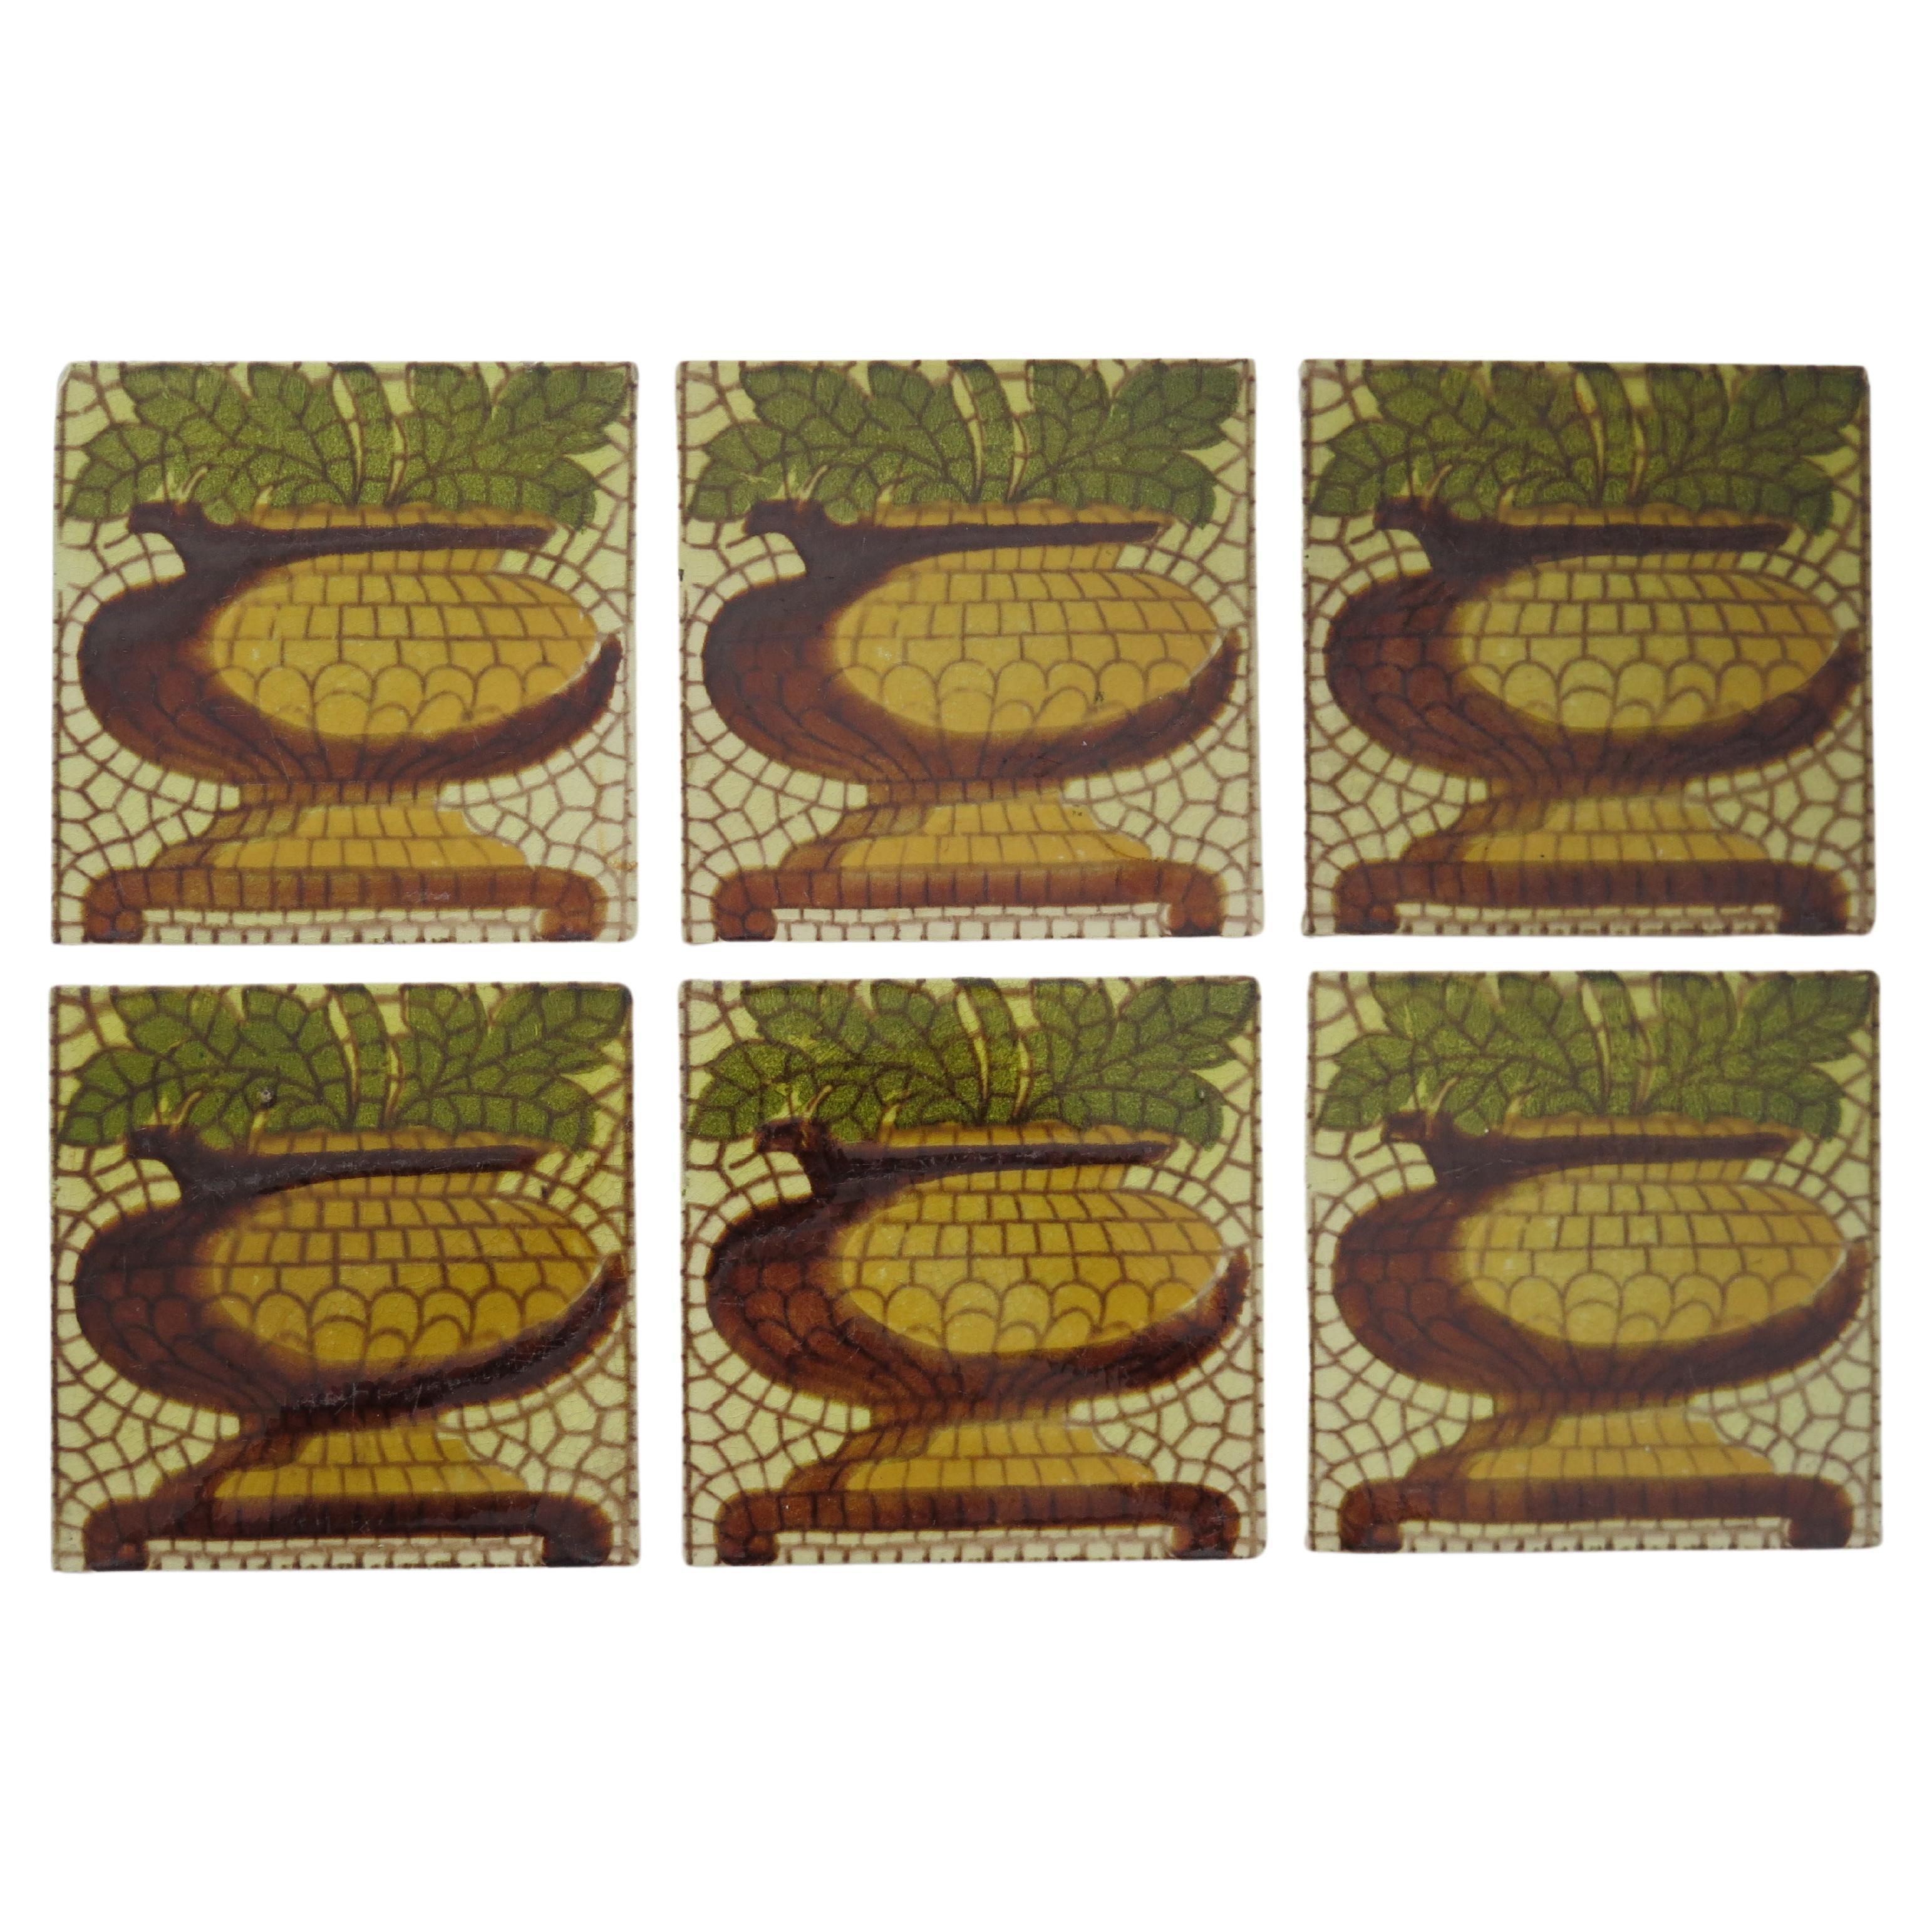 Set of SIX Ceramic Wall Tiles pineapple vase pat'n 6 inches Square,  circa 1960 For Sale